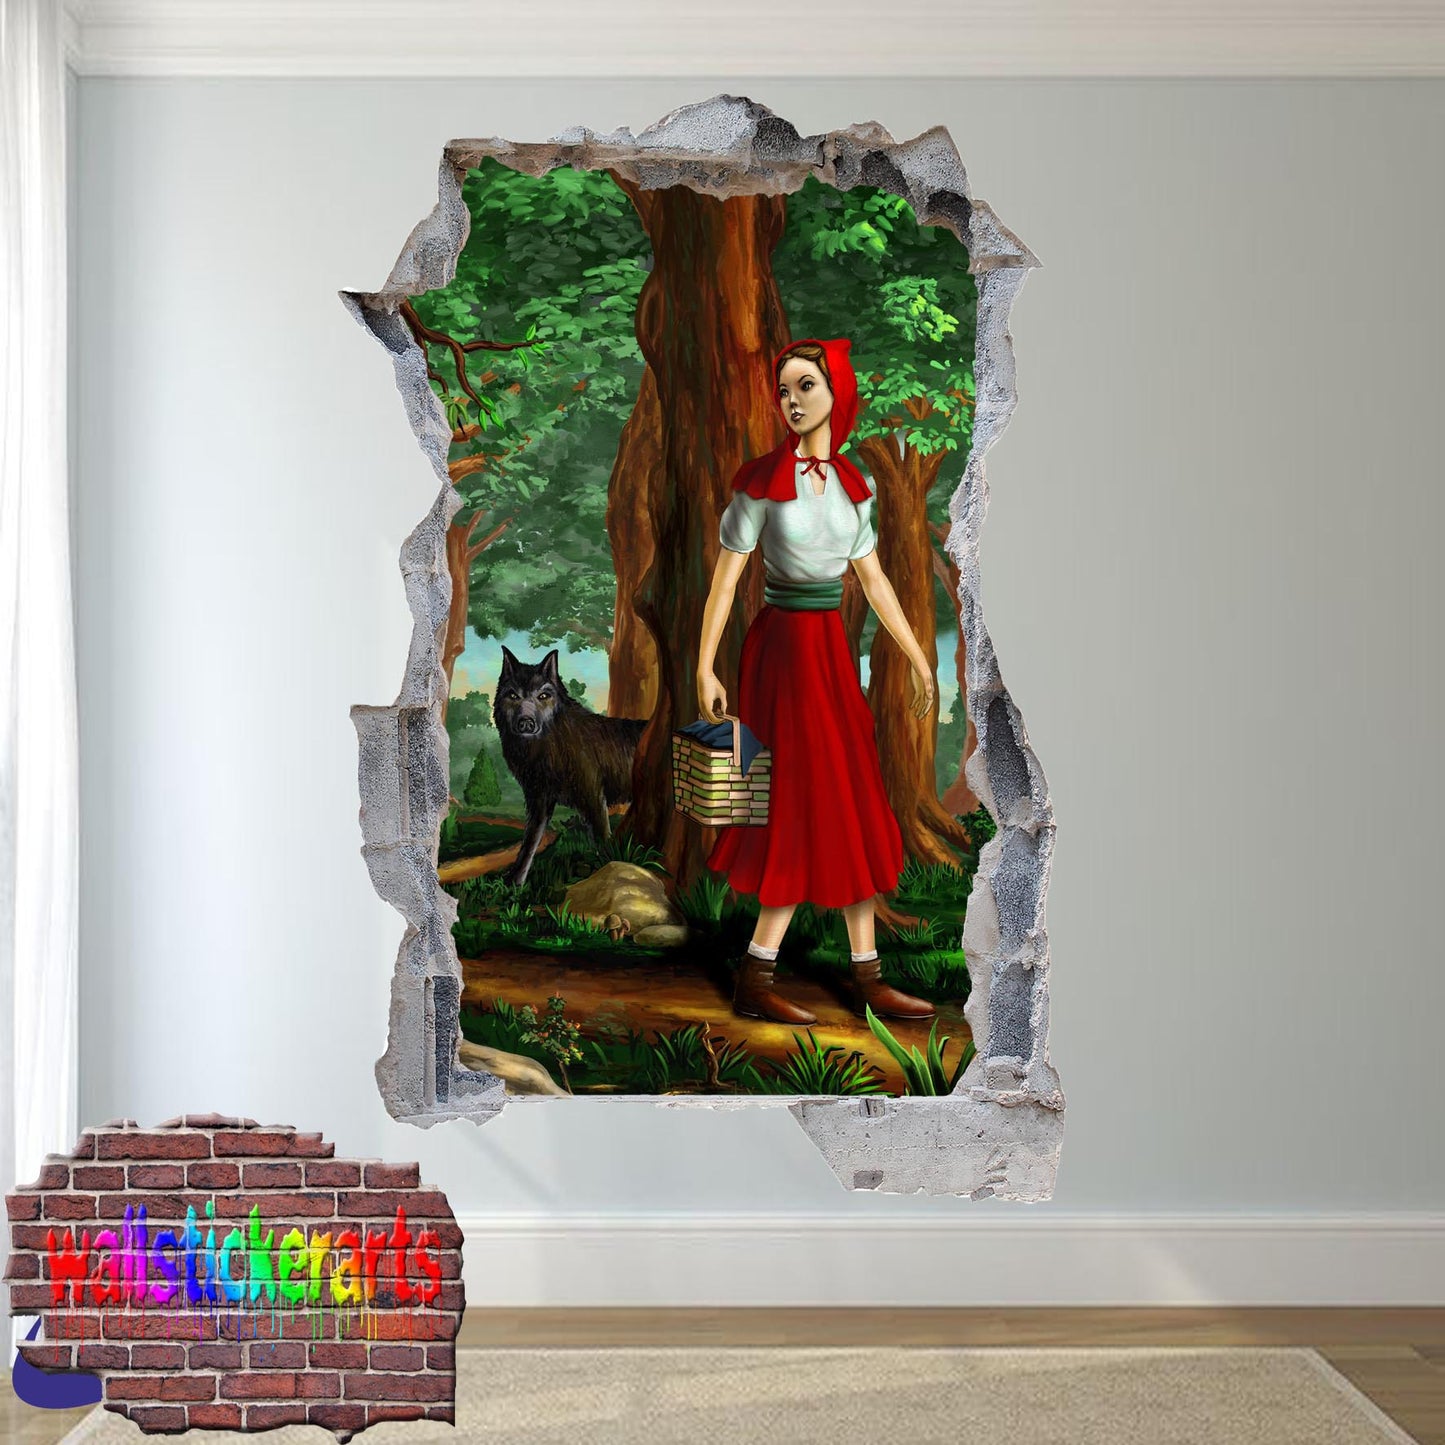 RED HOOD RIDING WALL STICKER MURAL DECAL POSTER